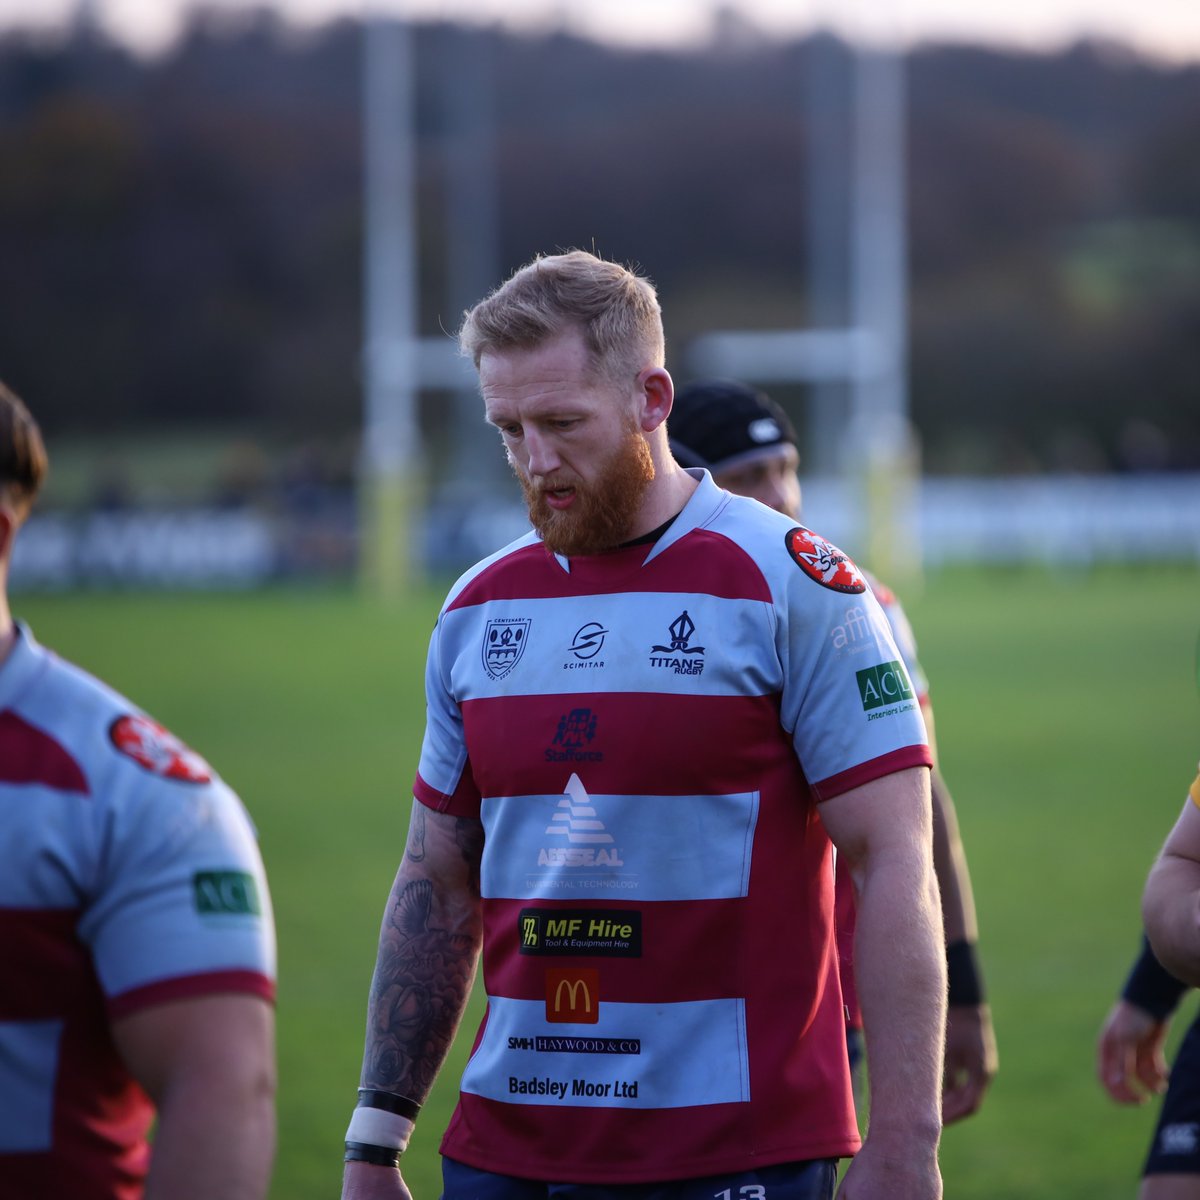 Here's your week 30 rugby round-up🏉 There was a huge result in Yorkshire as @RotherhamRugby leapfrogged Leeds Tykes to go top of the National 2 North, while @evrfc and @Llandoveryrfc walk away with wins. 🔗To read the full story, tap the link below. cfhj.short.gy/week30…